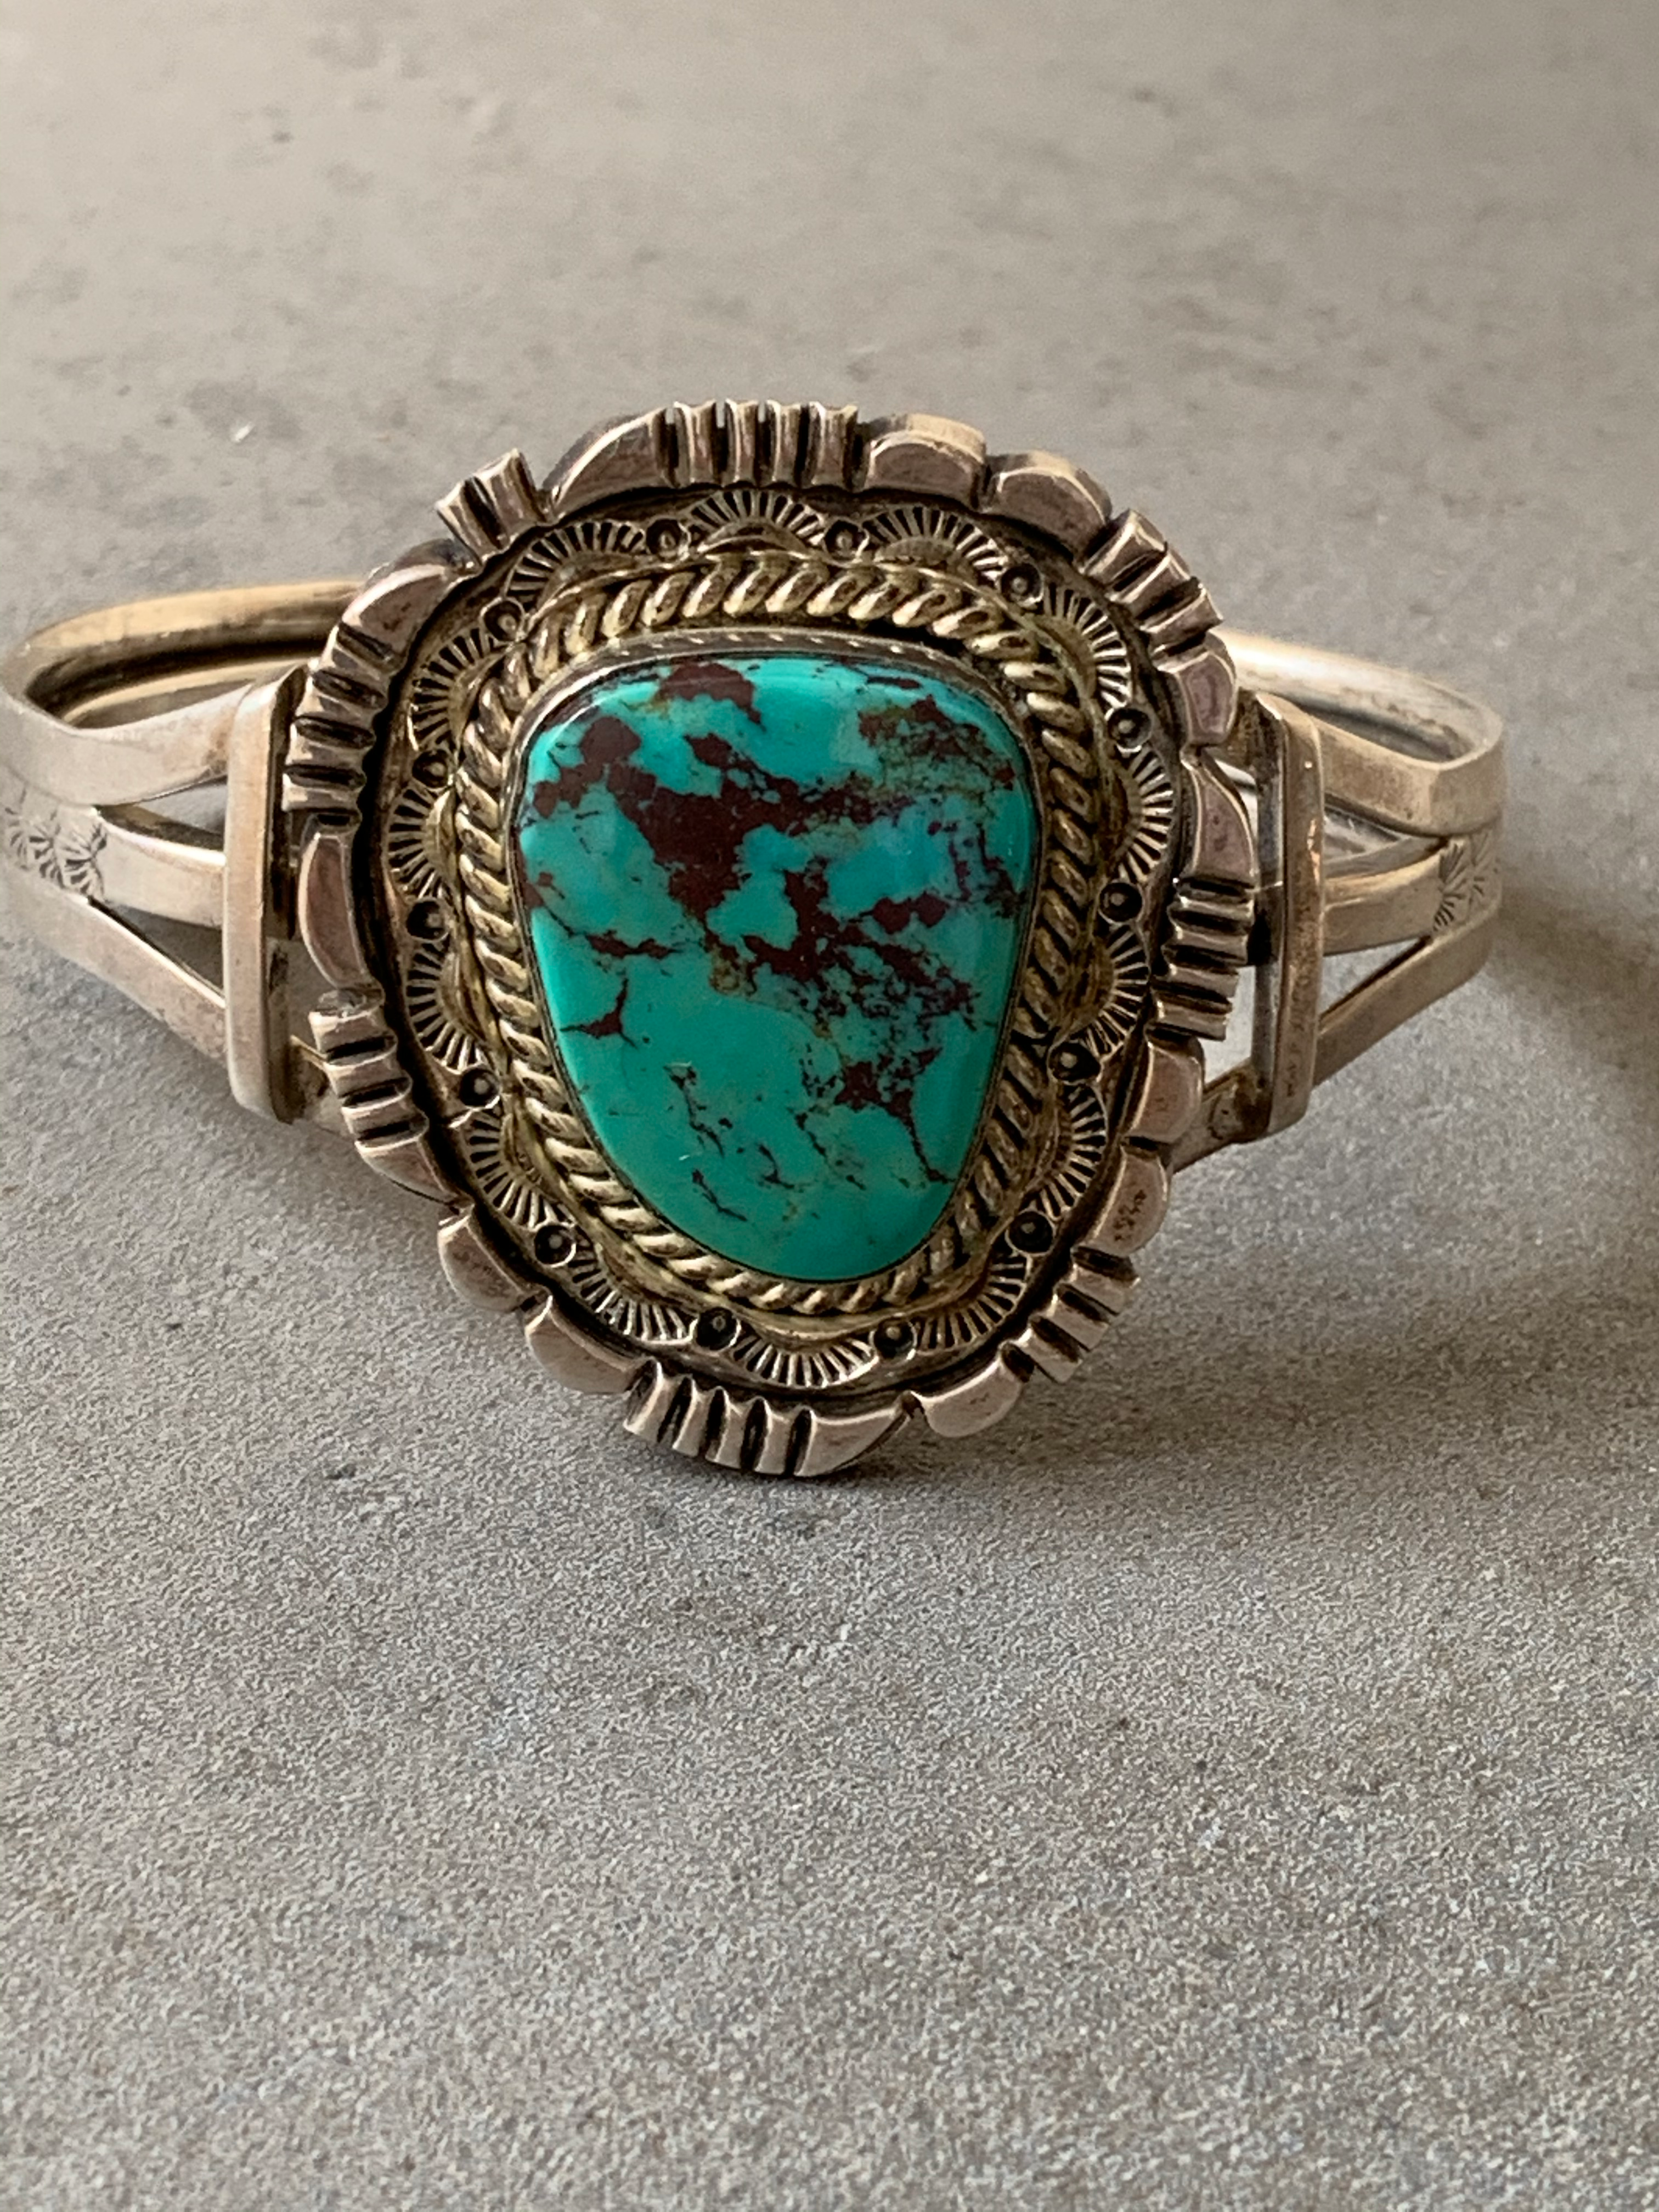 Wesley Craig Navajo IHMSS Turquoise Sterling Silver Cuff